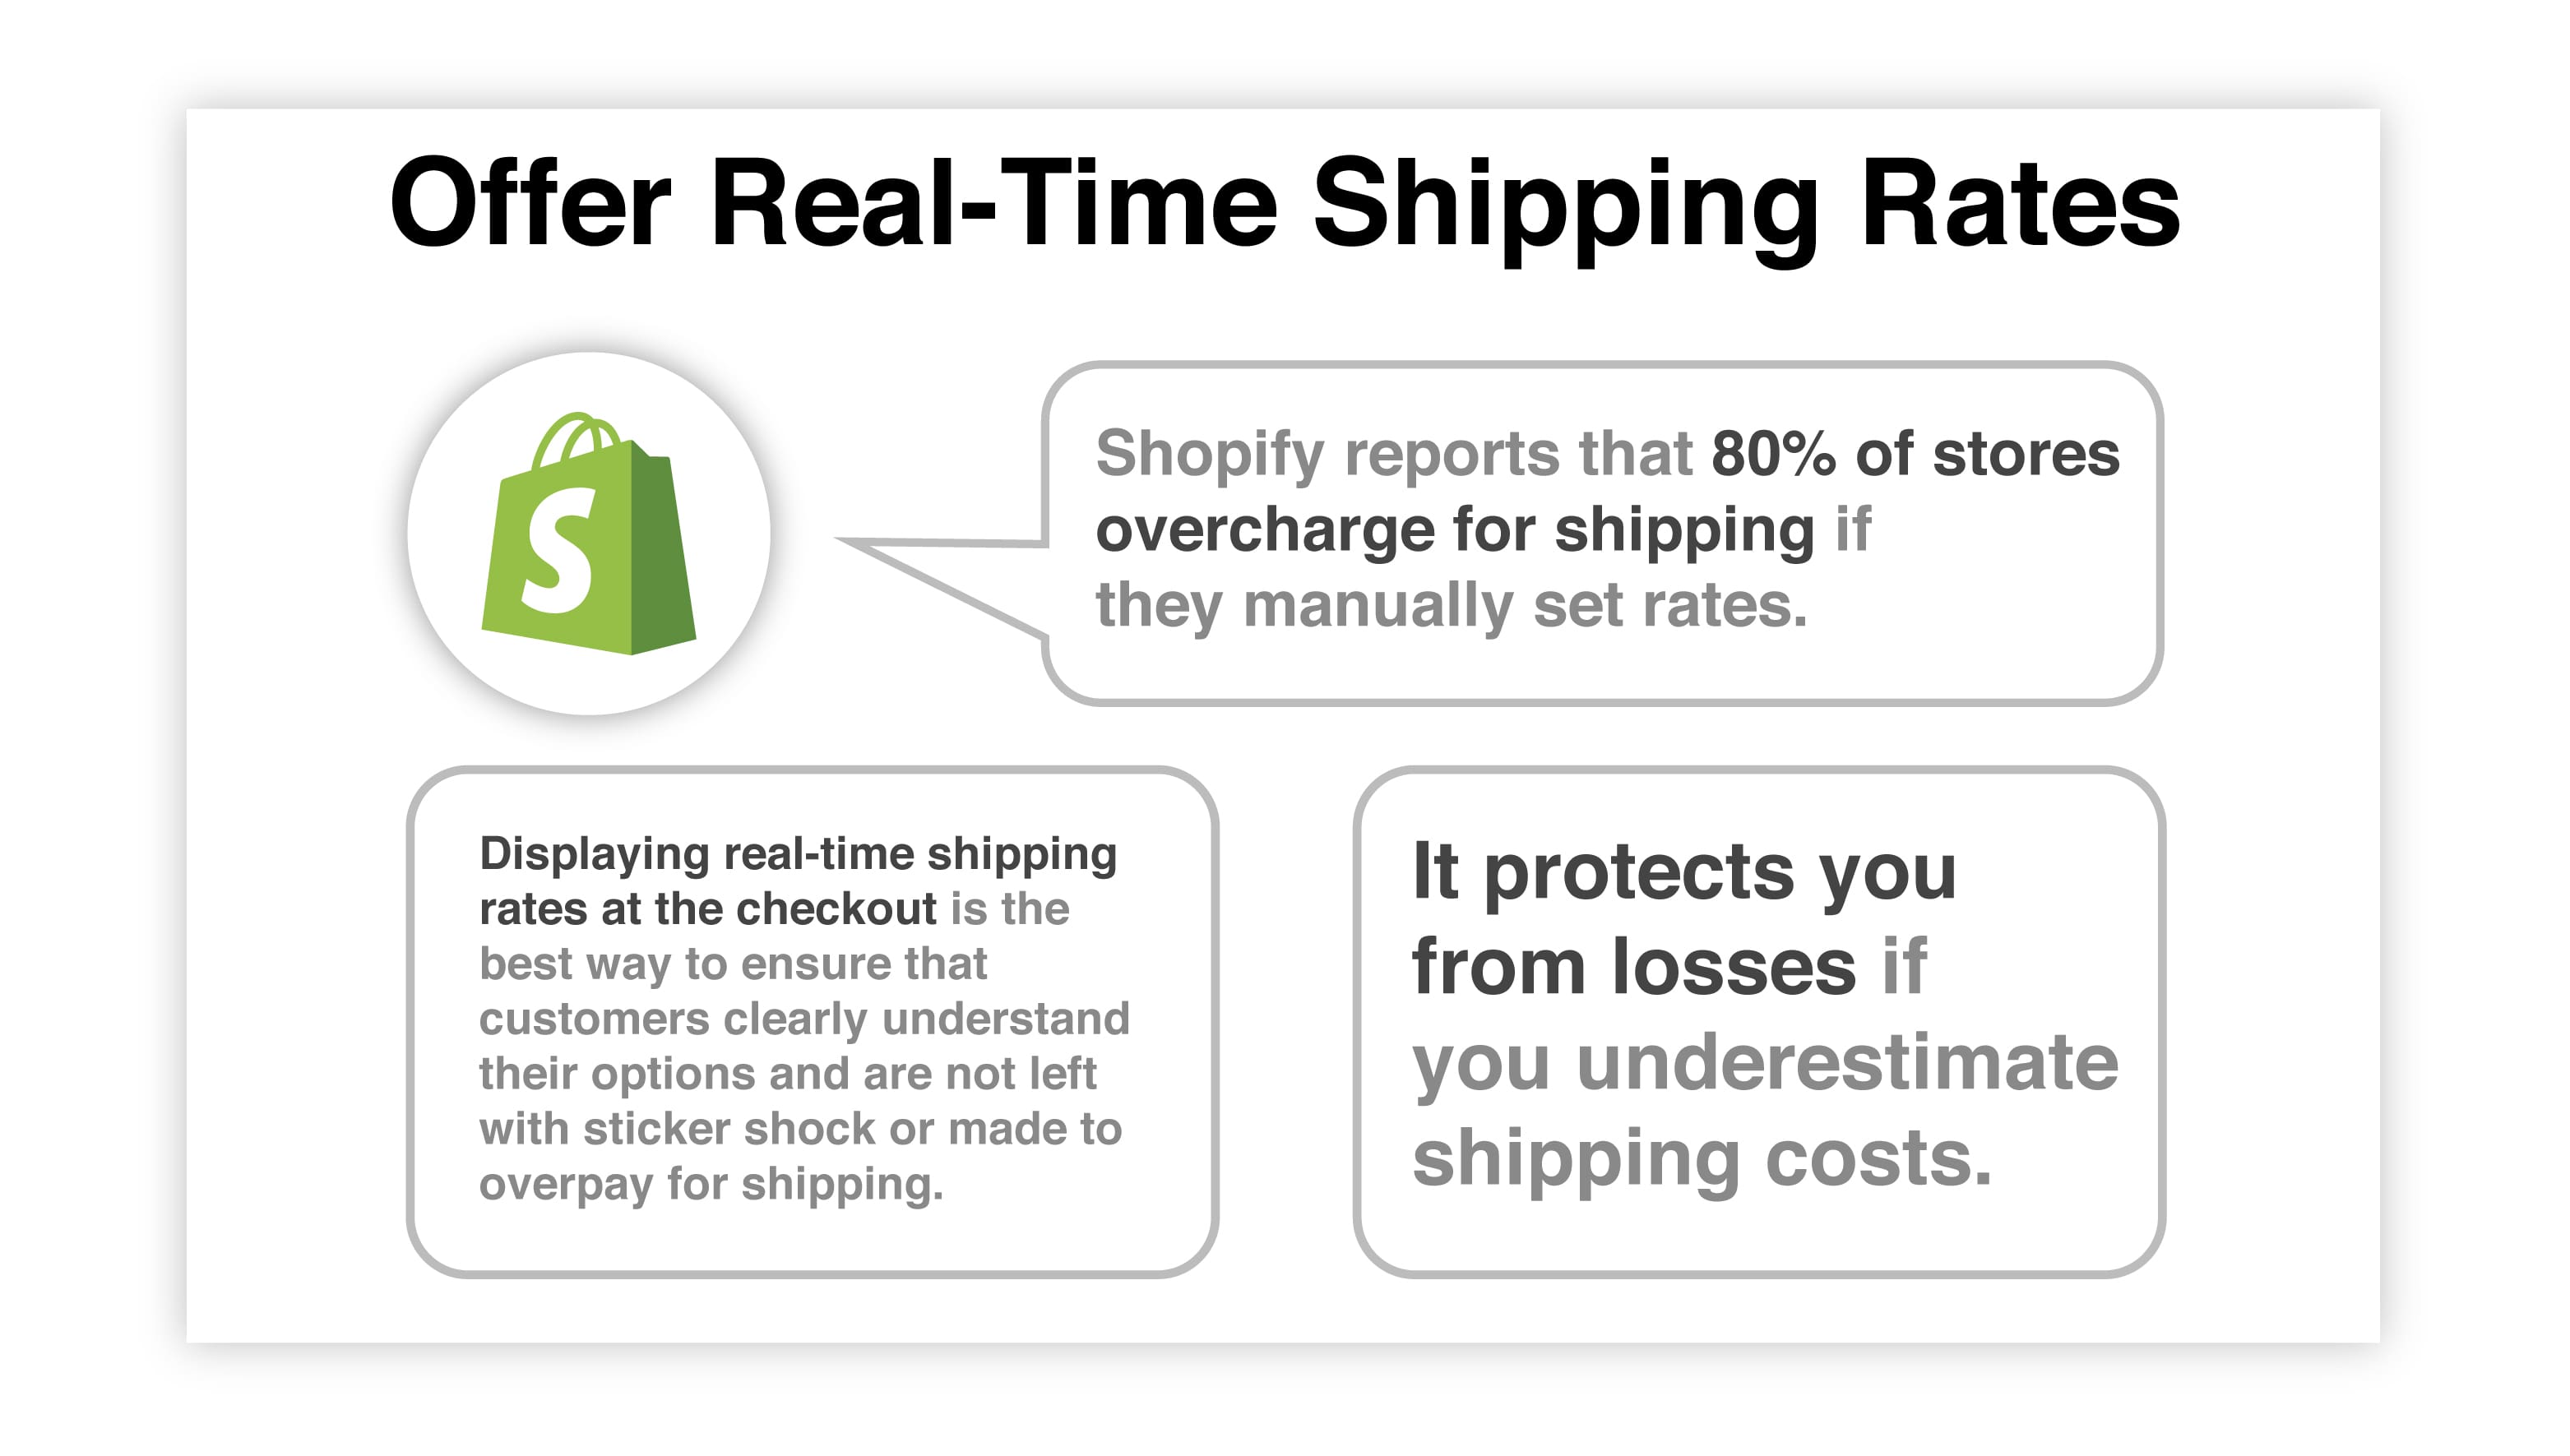 Offer Real-Time Shipping Rates